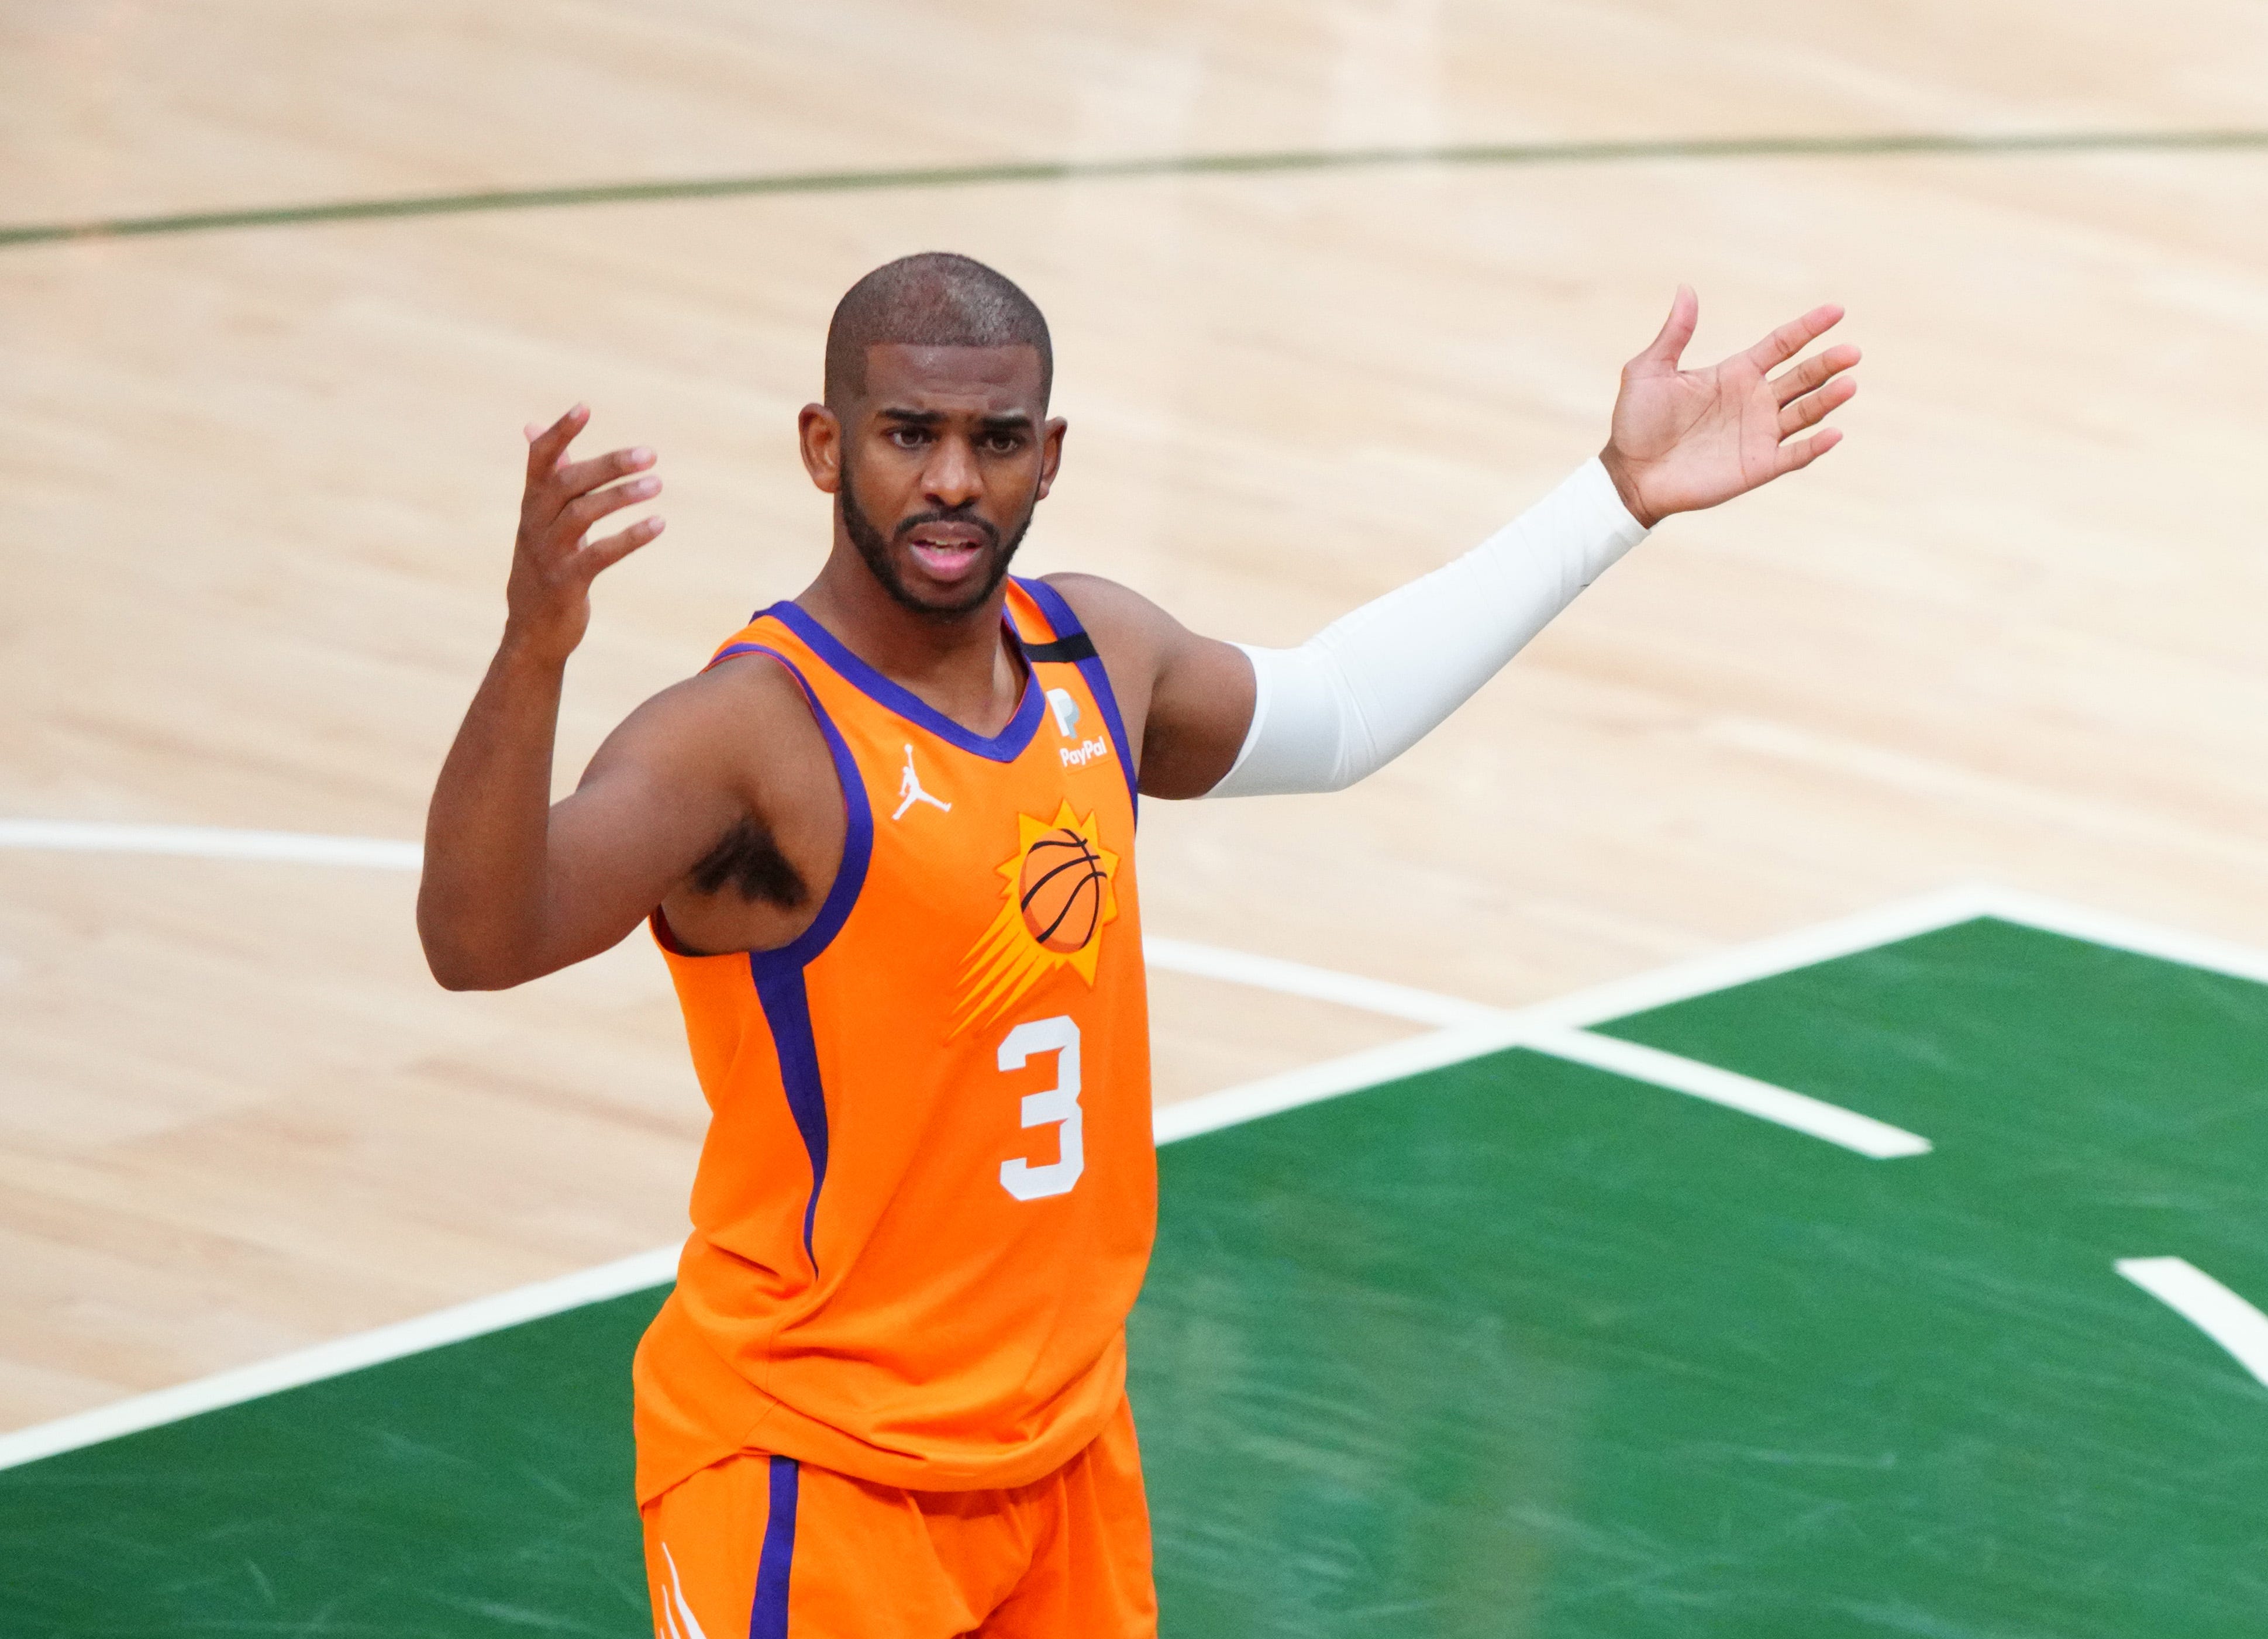 Chris Paul stays with Phoenix Suns, agreeing to four-year, $120 million deal